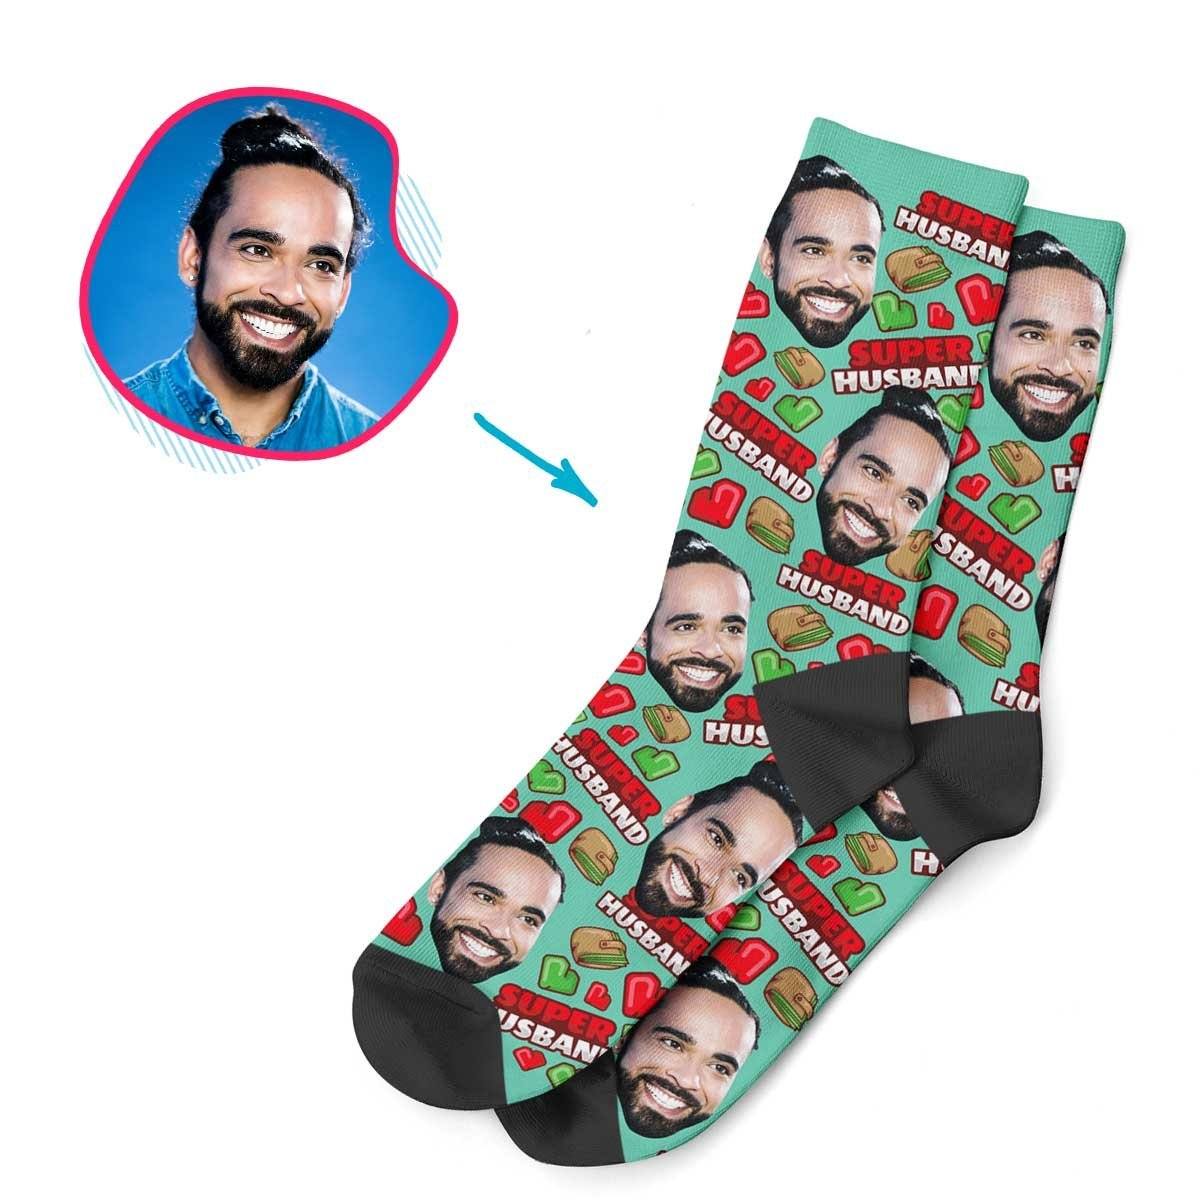 Mint Husband personalized socks with photo of face printed on them